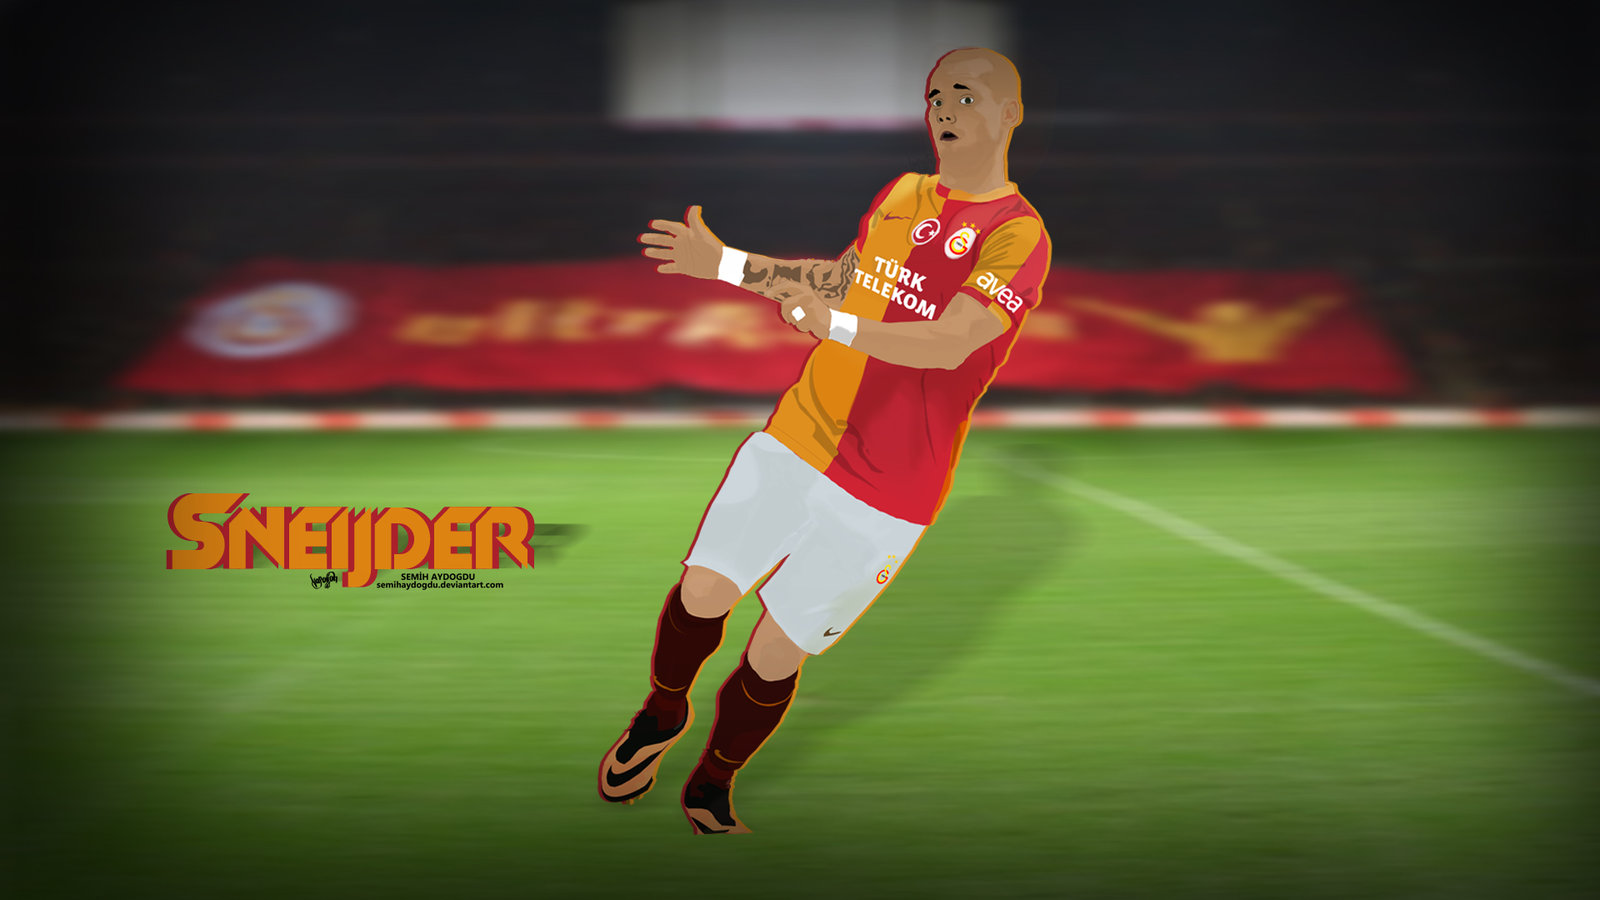 Wesley Sneijder Vector Wallpaper By Napolion06